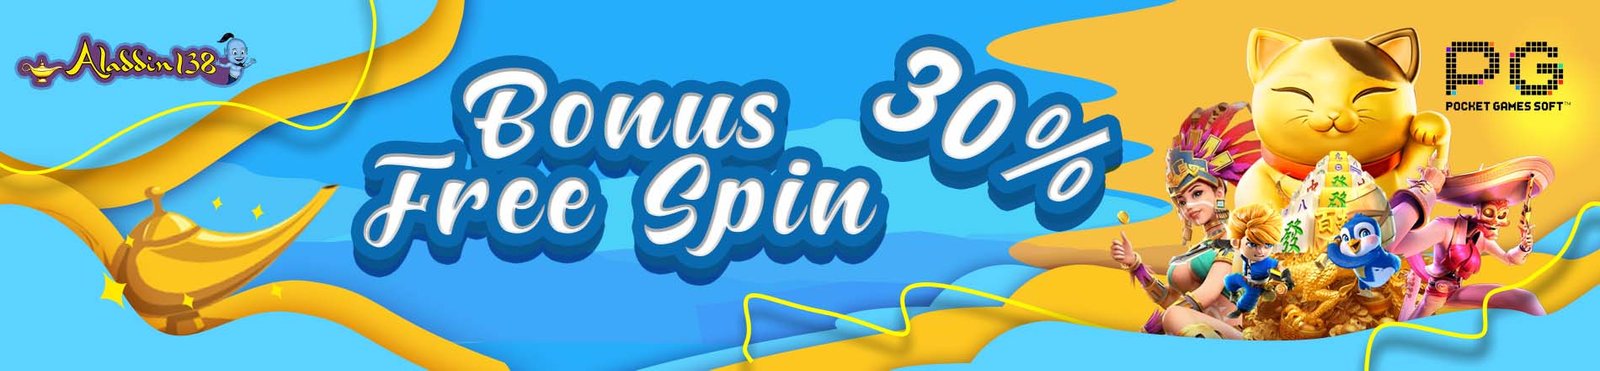 FREE SPIN PG SOFT 30%